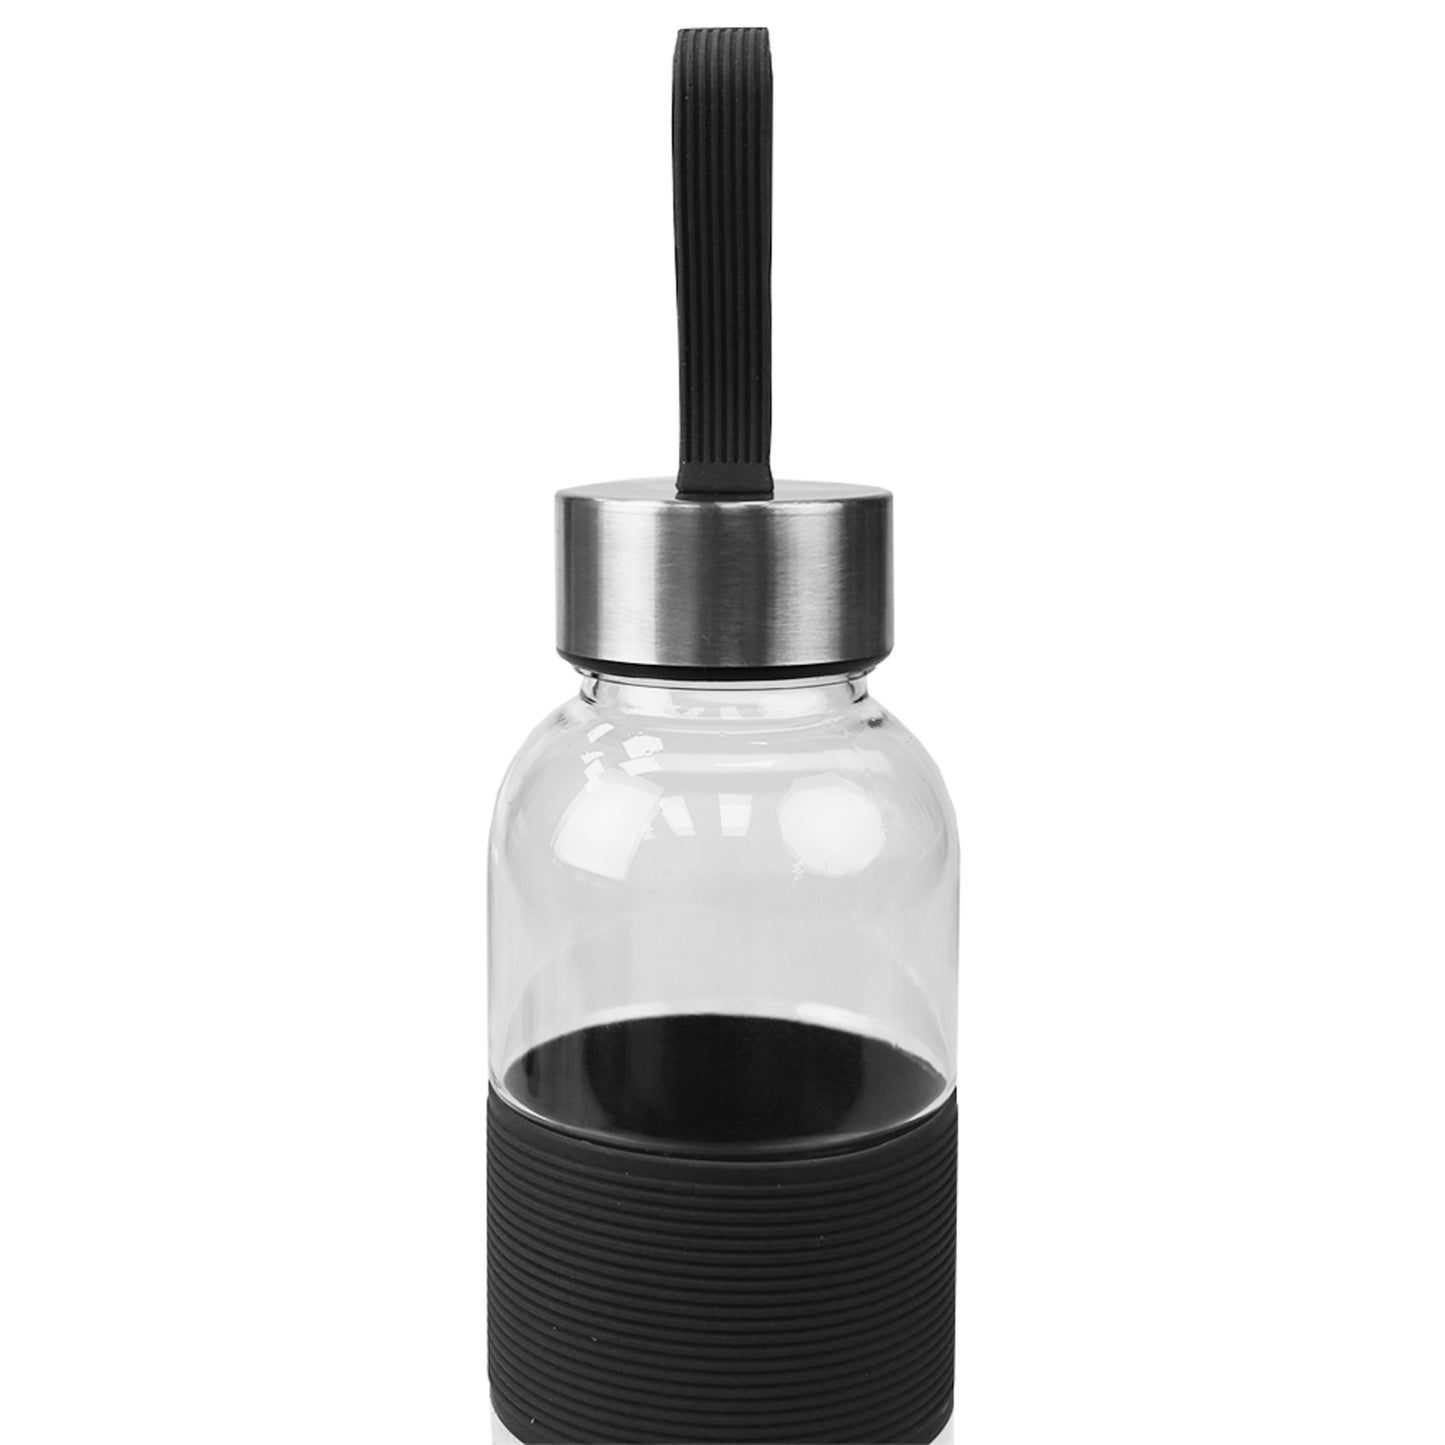 Home Basics 20 Oz. Plastic Travel Bottle with Built-in Carrying Strap and Textured Grip, Black - Black